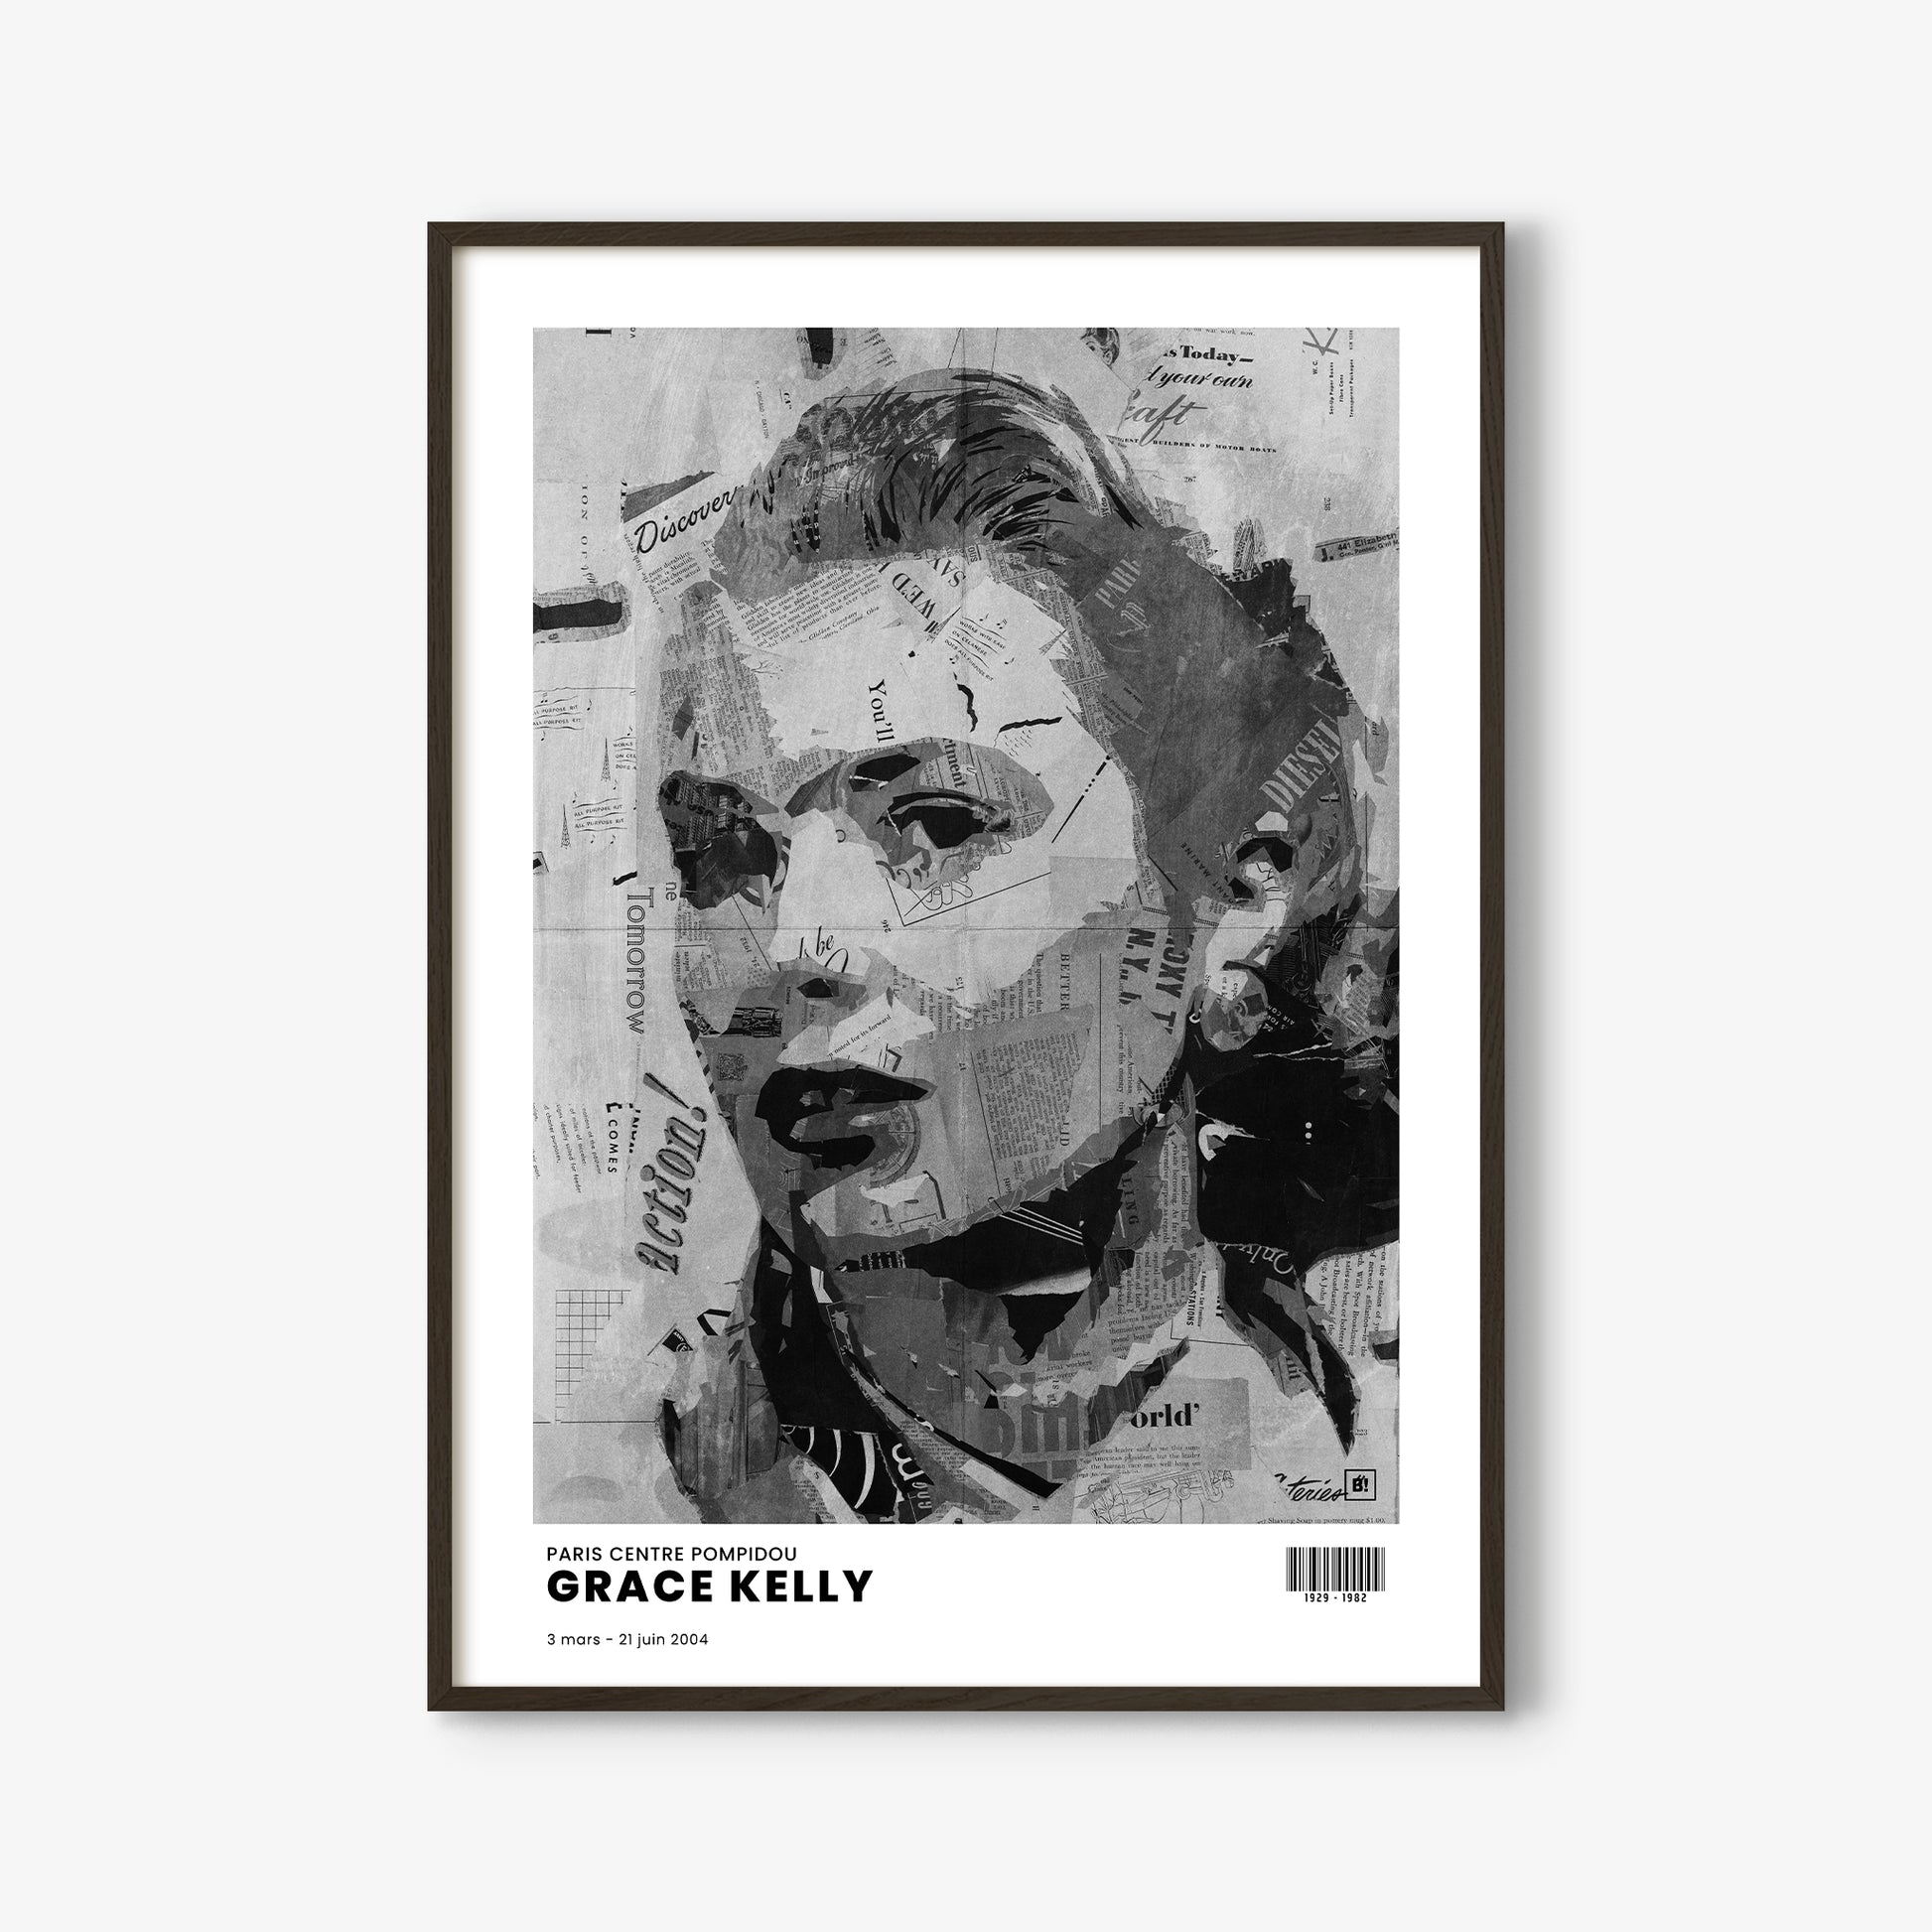 Be inspired by Iconic Grace Kelly Paris Centre Pompidou Exhibition Art Print. The artwork is presented in a black oak frame that captures its timeless beauty in every detail.